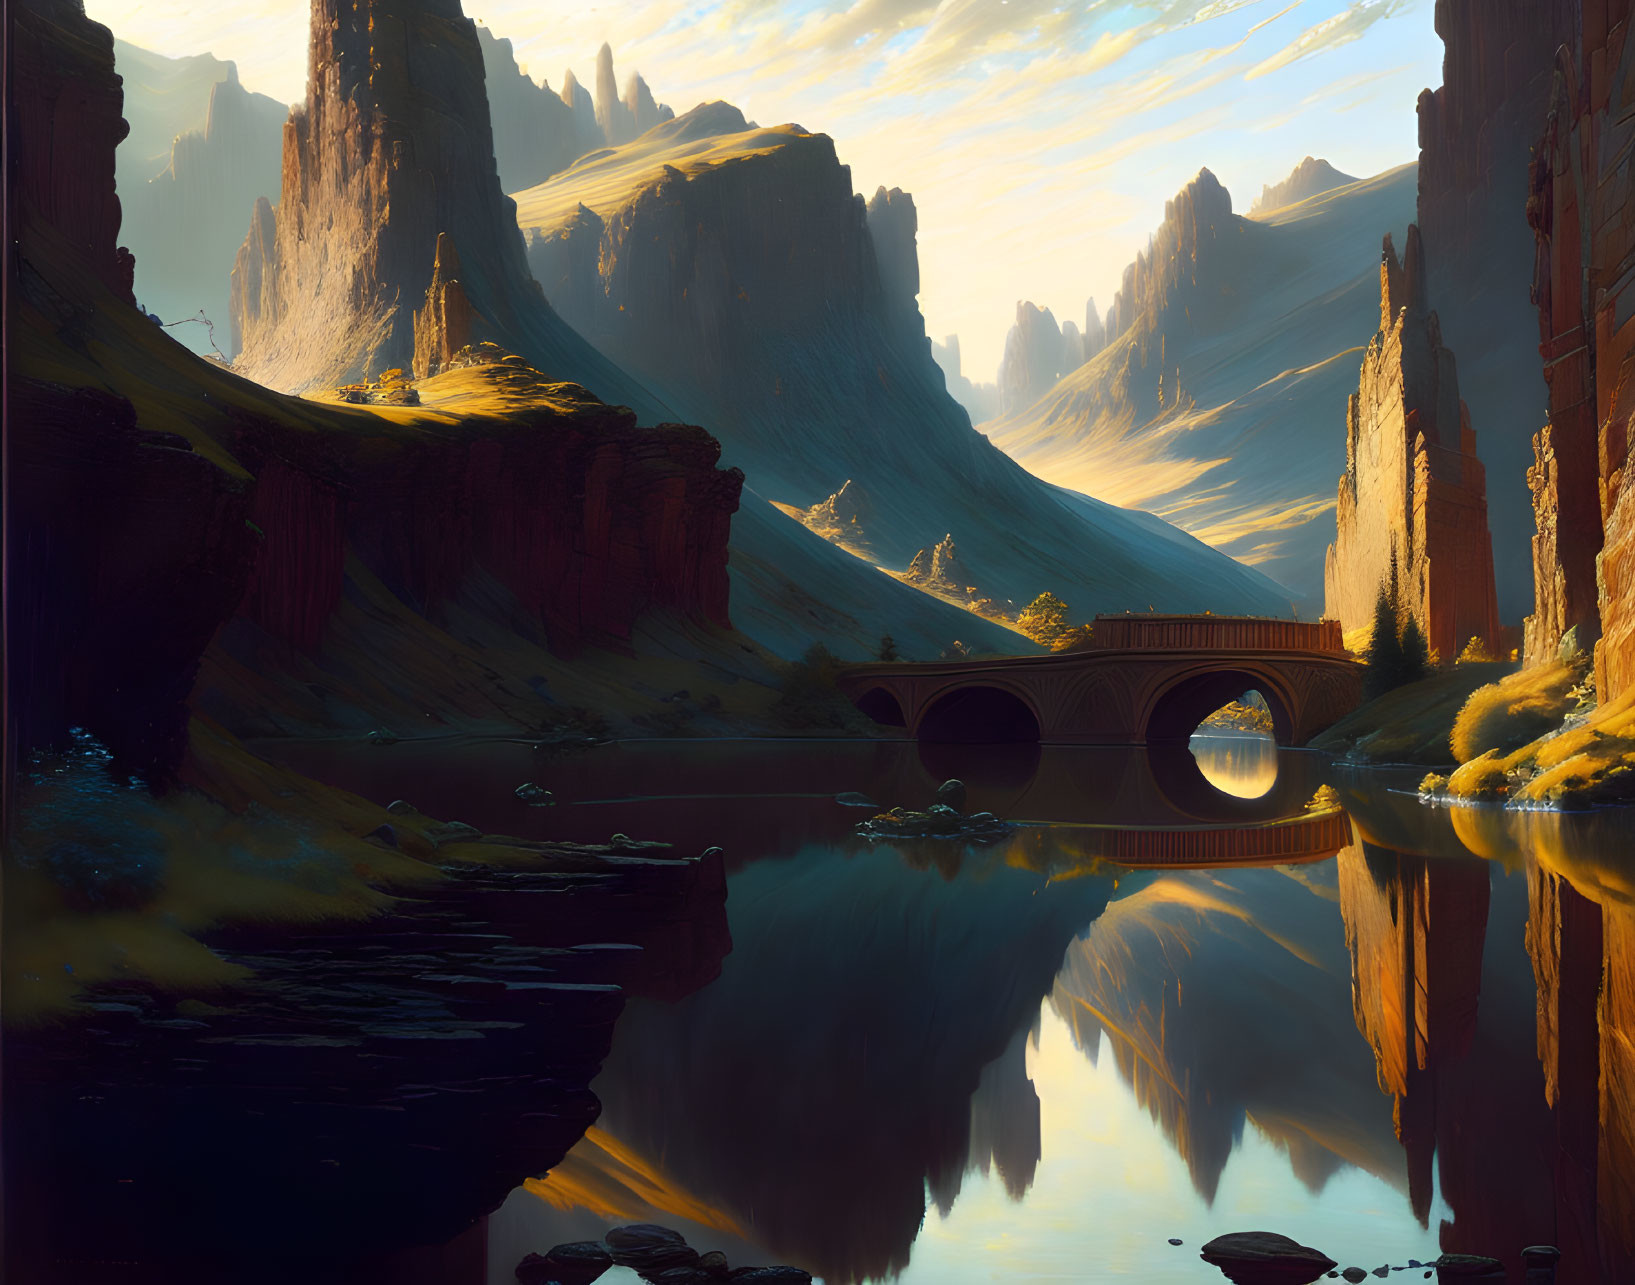 Serene landscape with towering cliffs, river, and arched bridge at sunrise